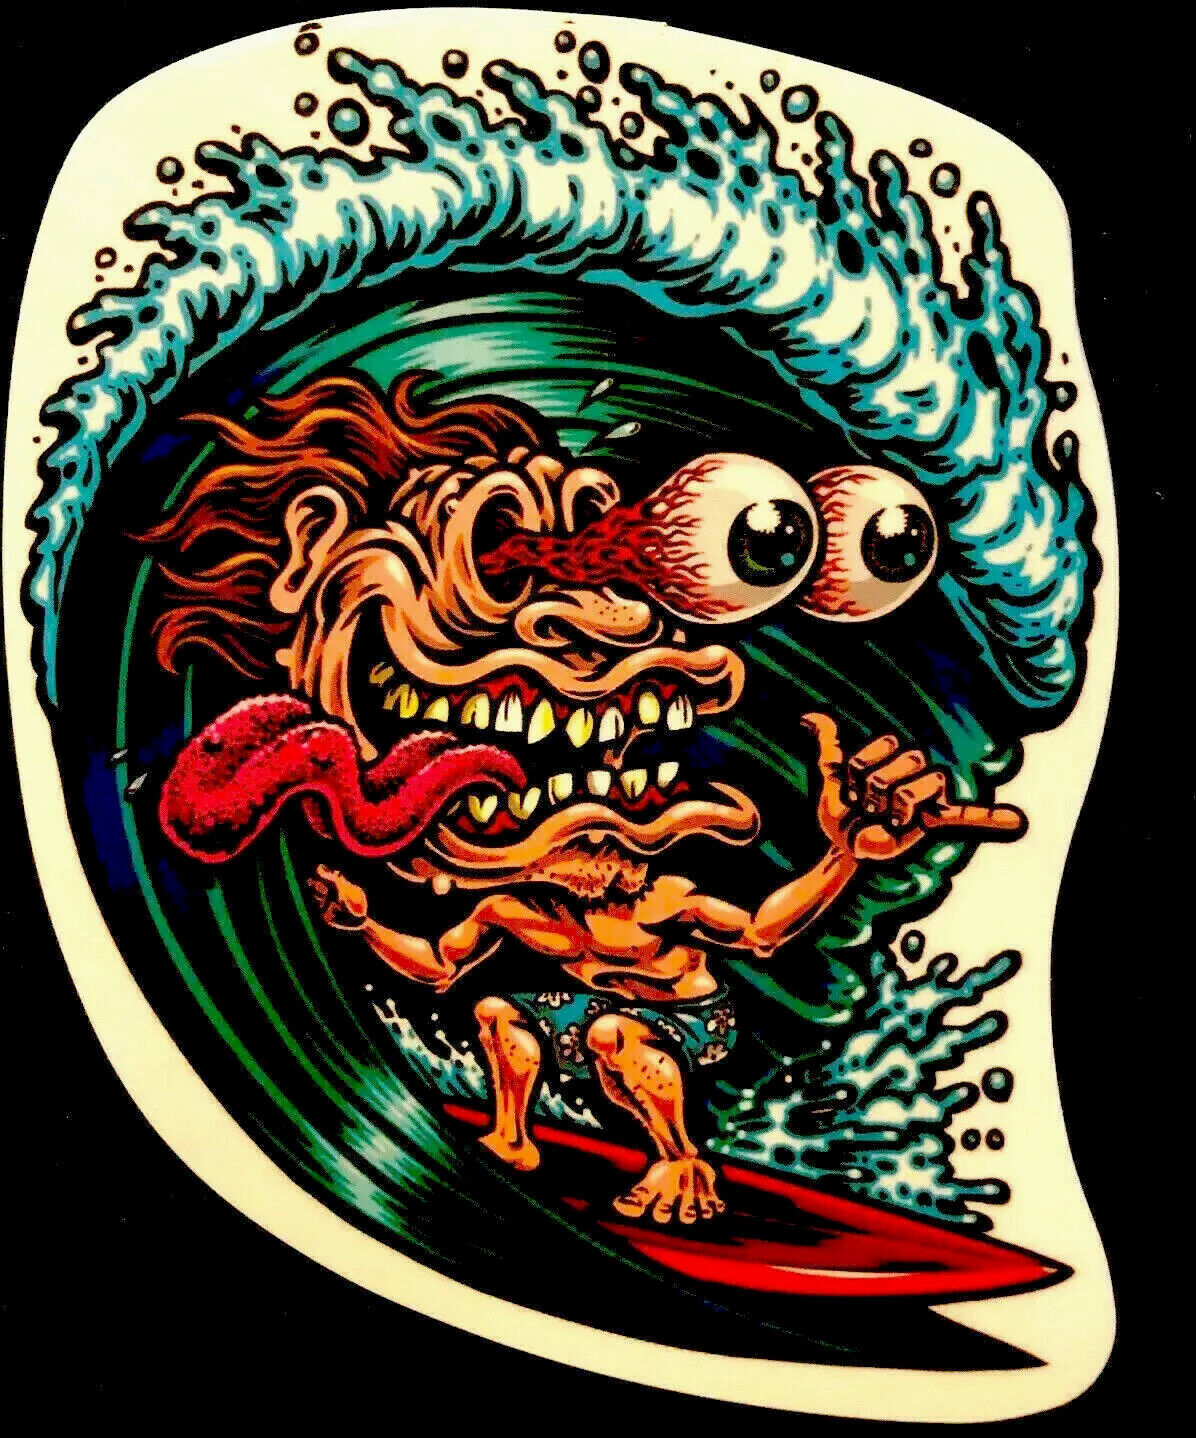 RAT FINK STICKER ”SURF WAVE DUDE” 3“ X 4” TOTALLY AMAZING & GLOSSY